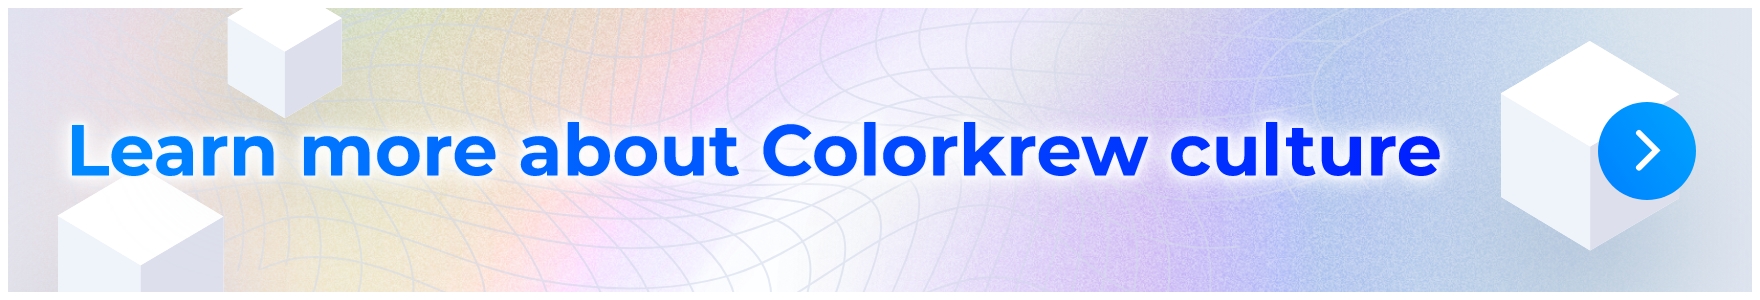 Learn more about Colorkrew culture